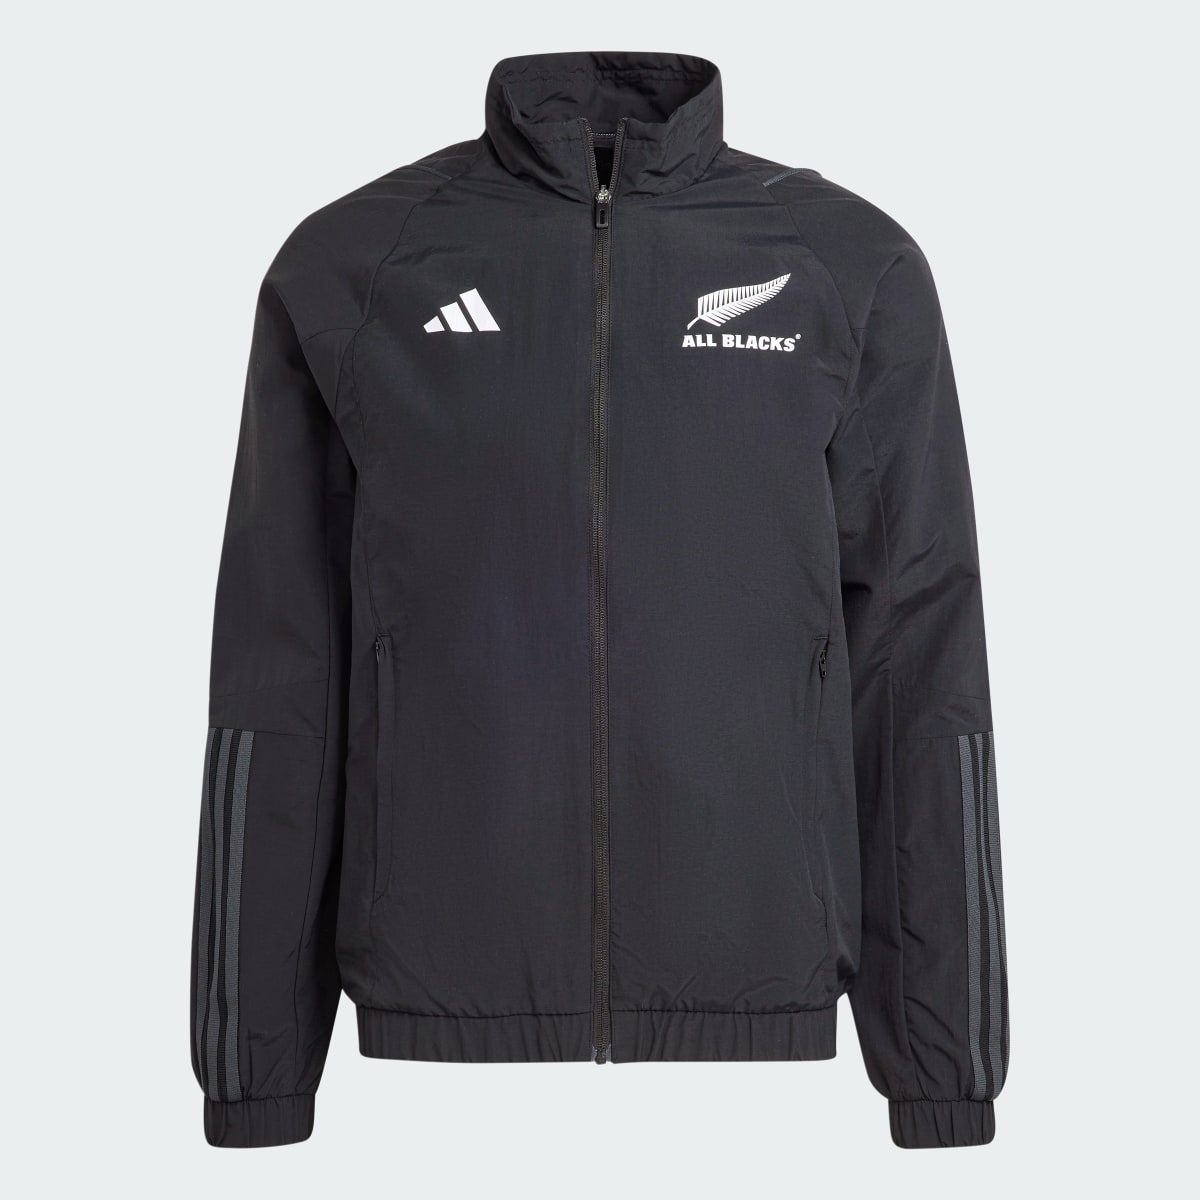 Adidas All Blacks Rugby Track Suit Track Top. 6